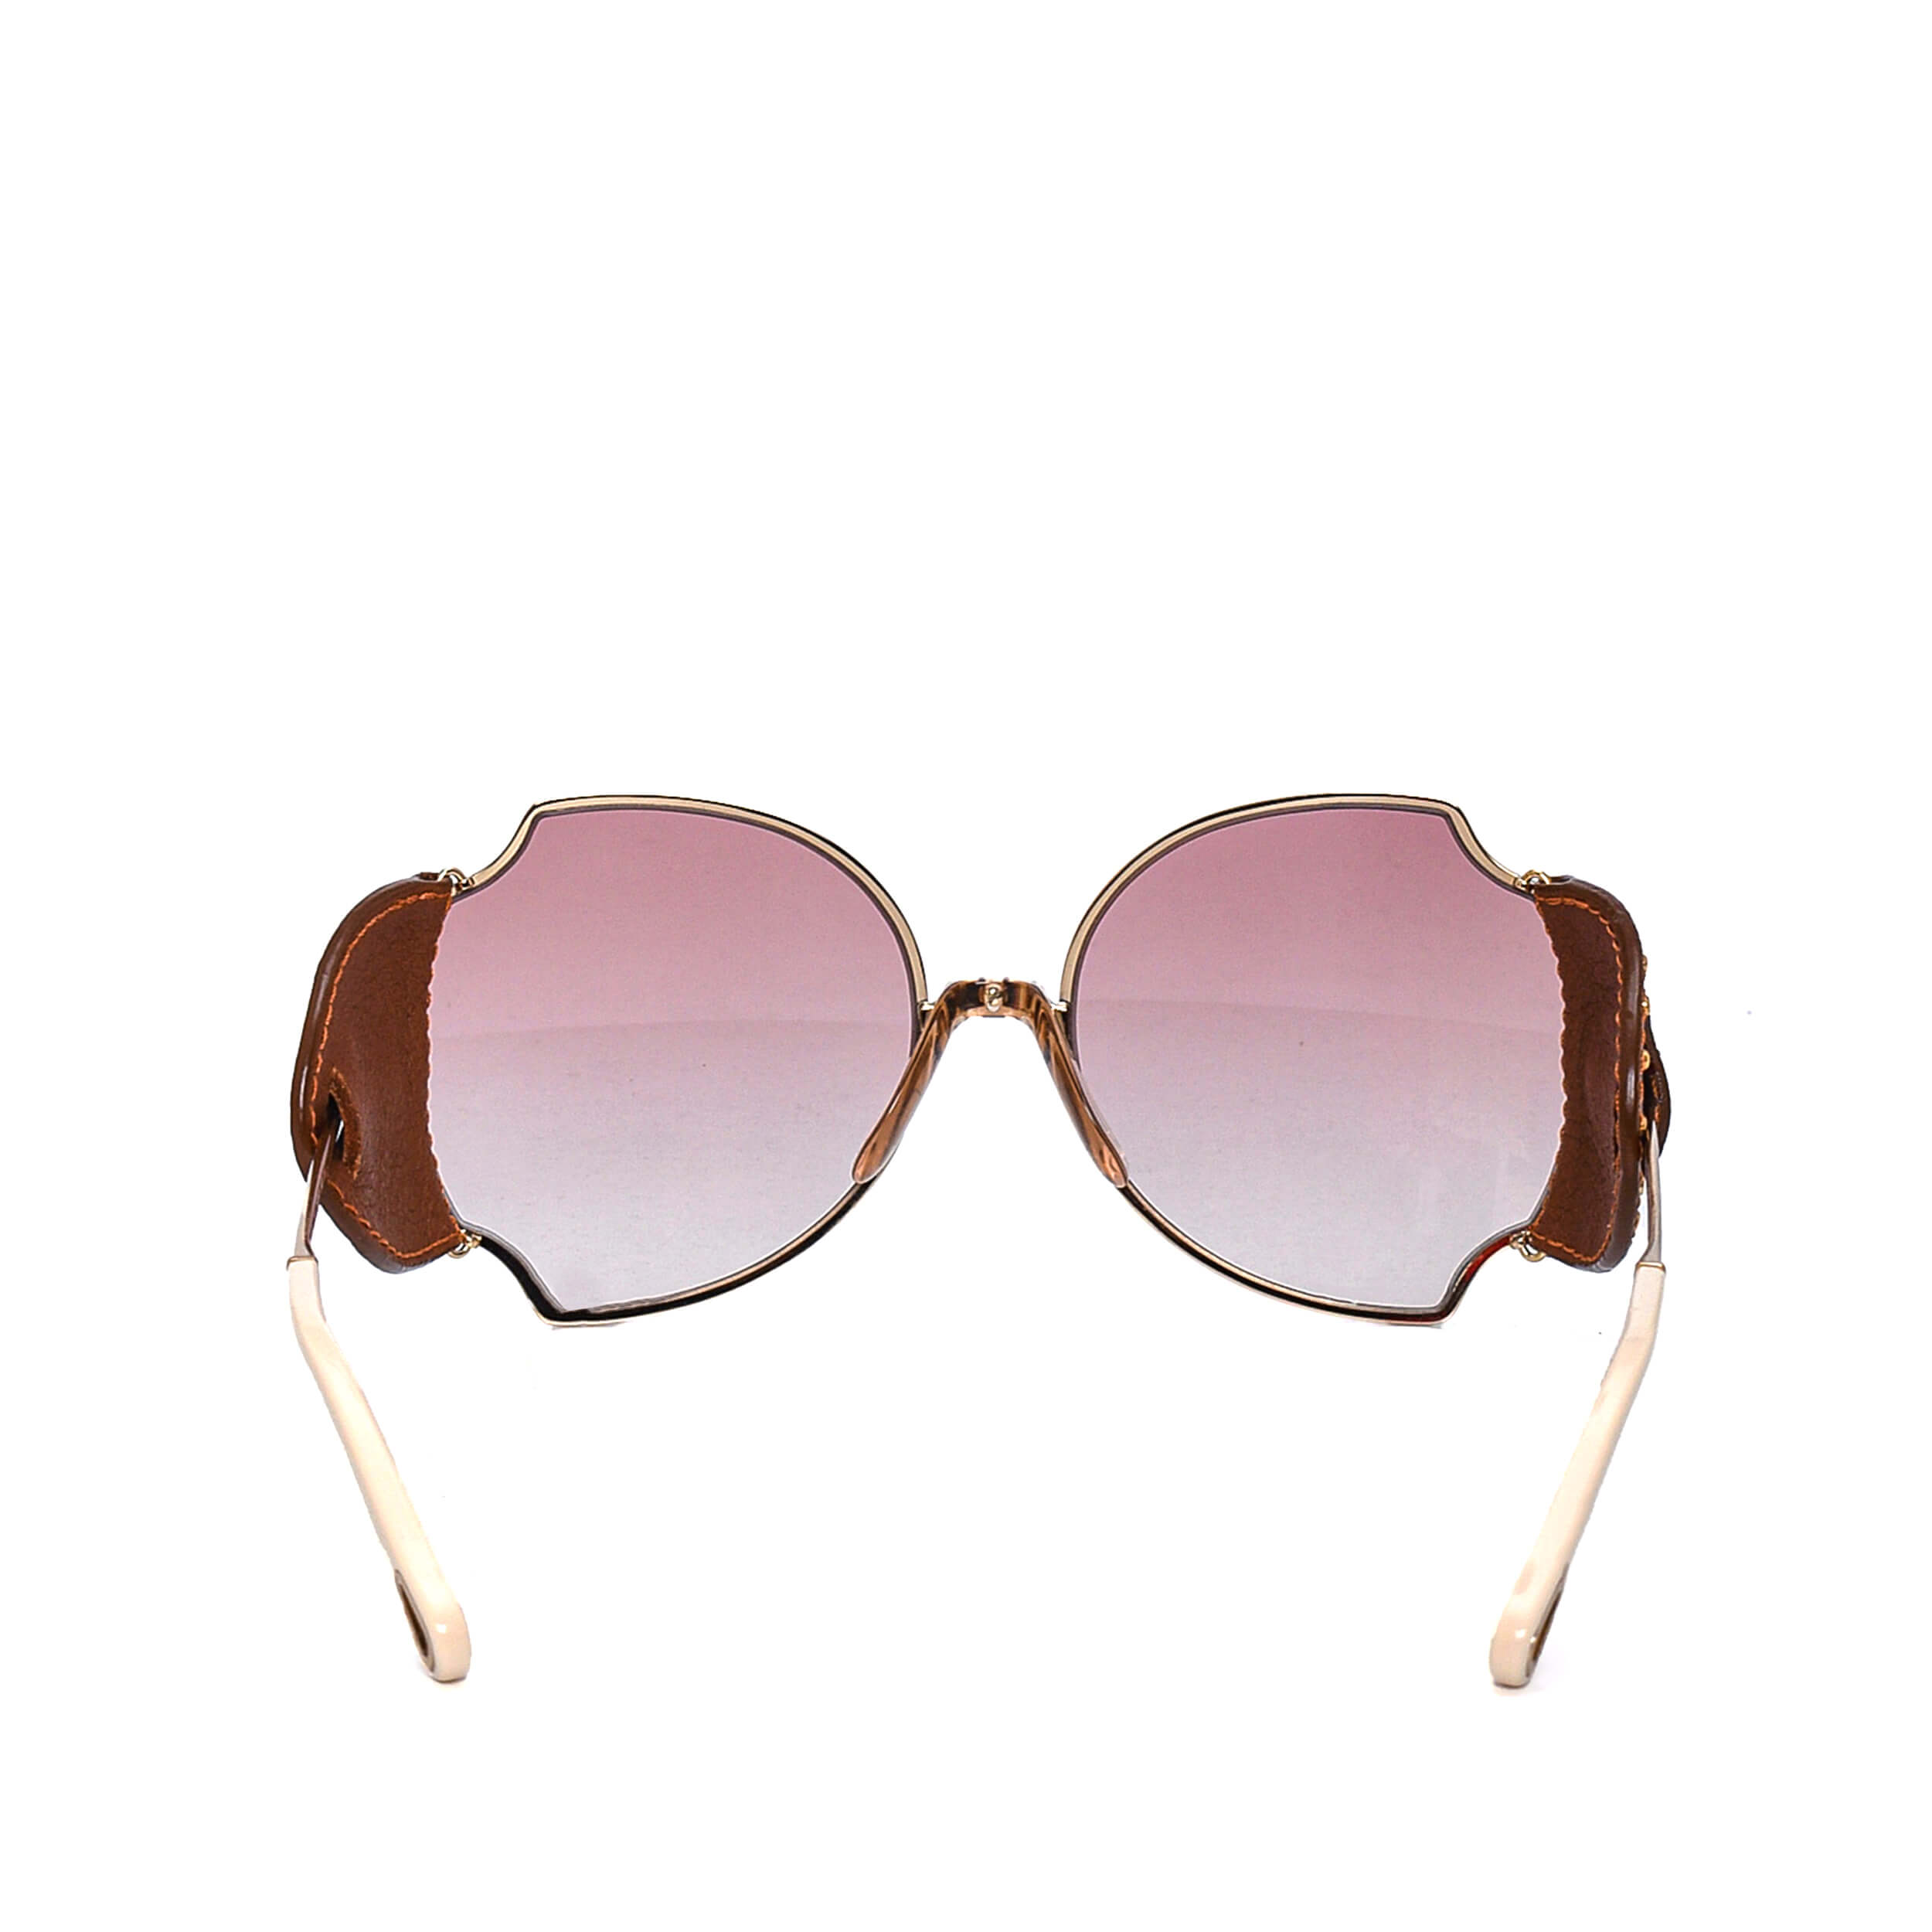 Chloe- Brown Leather Detailed Sunglasses